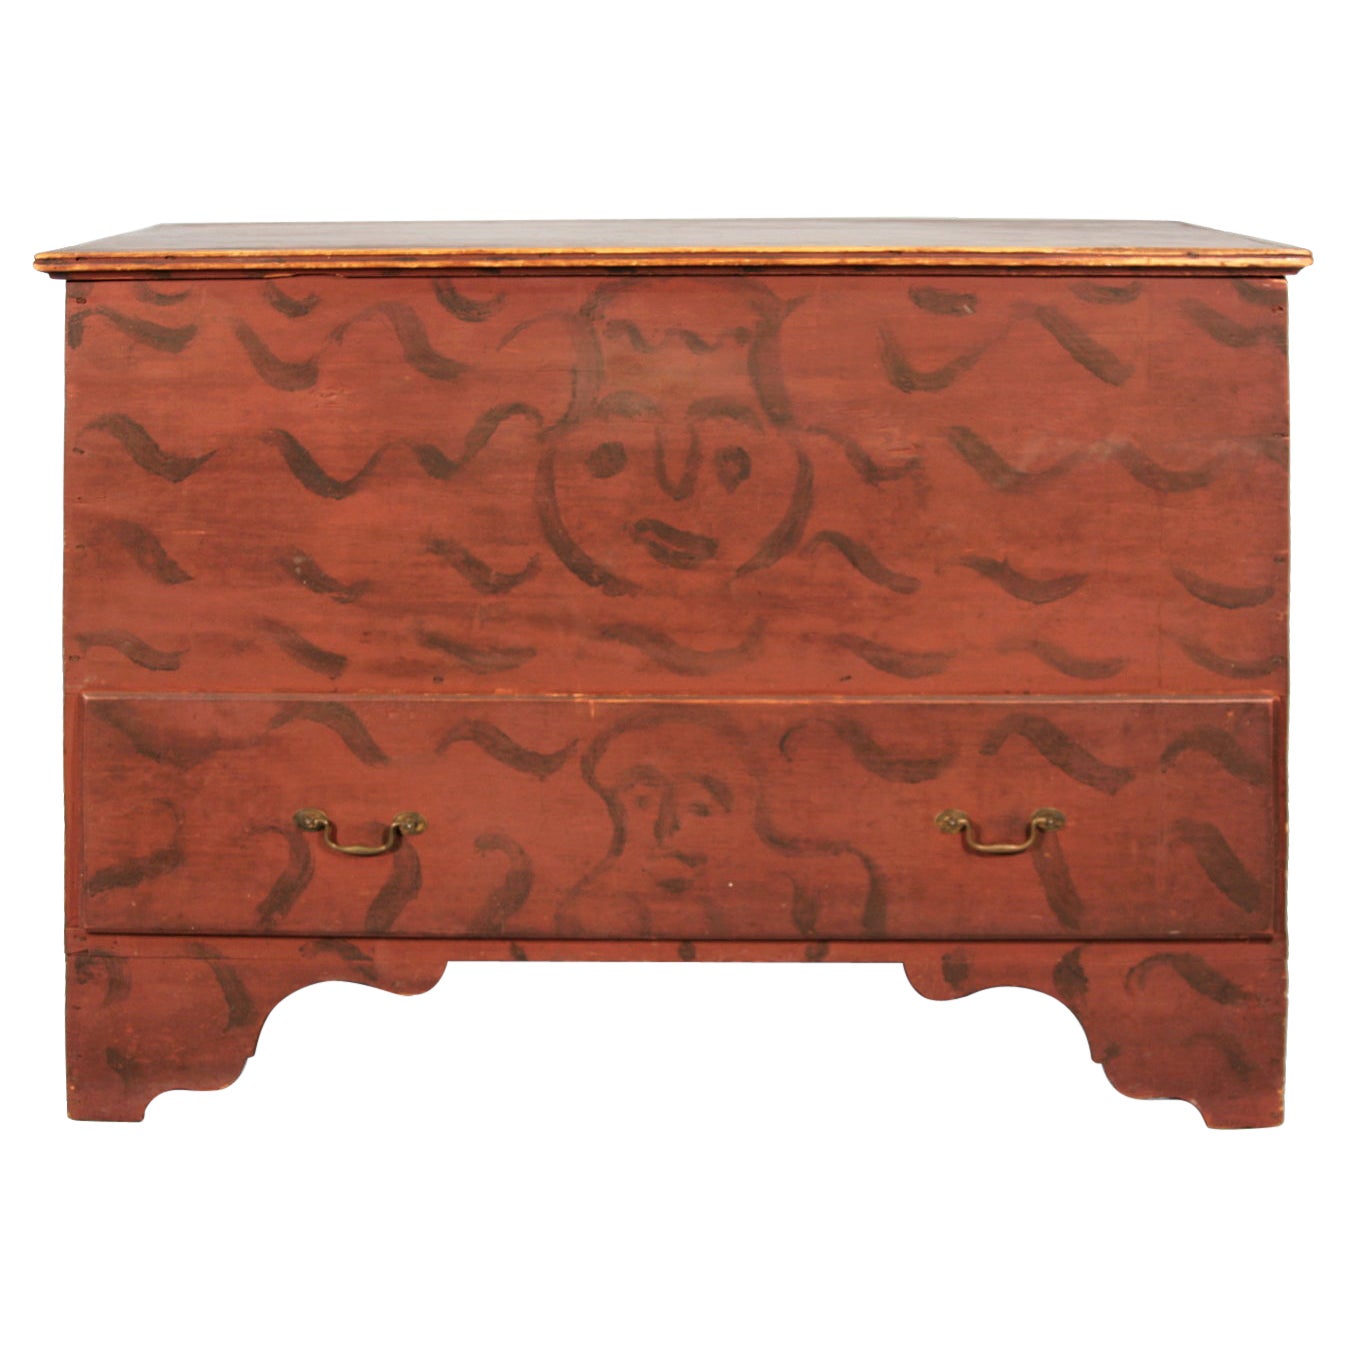 Queen Anne Period Blanket Chest with Two Whimsical Faces, ca 1740-1760